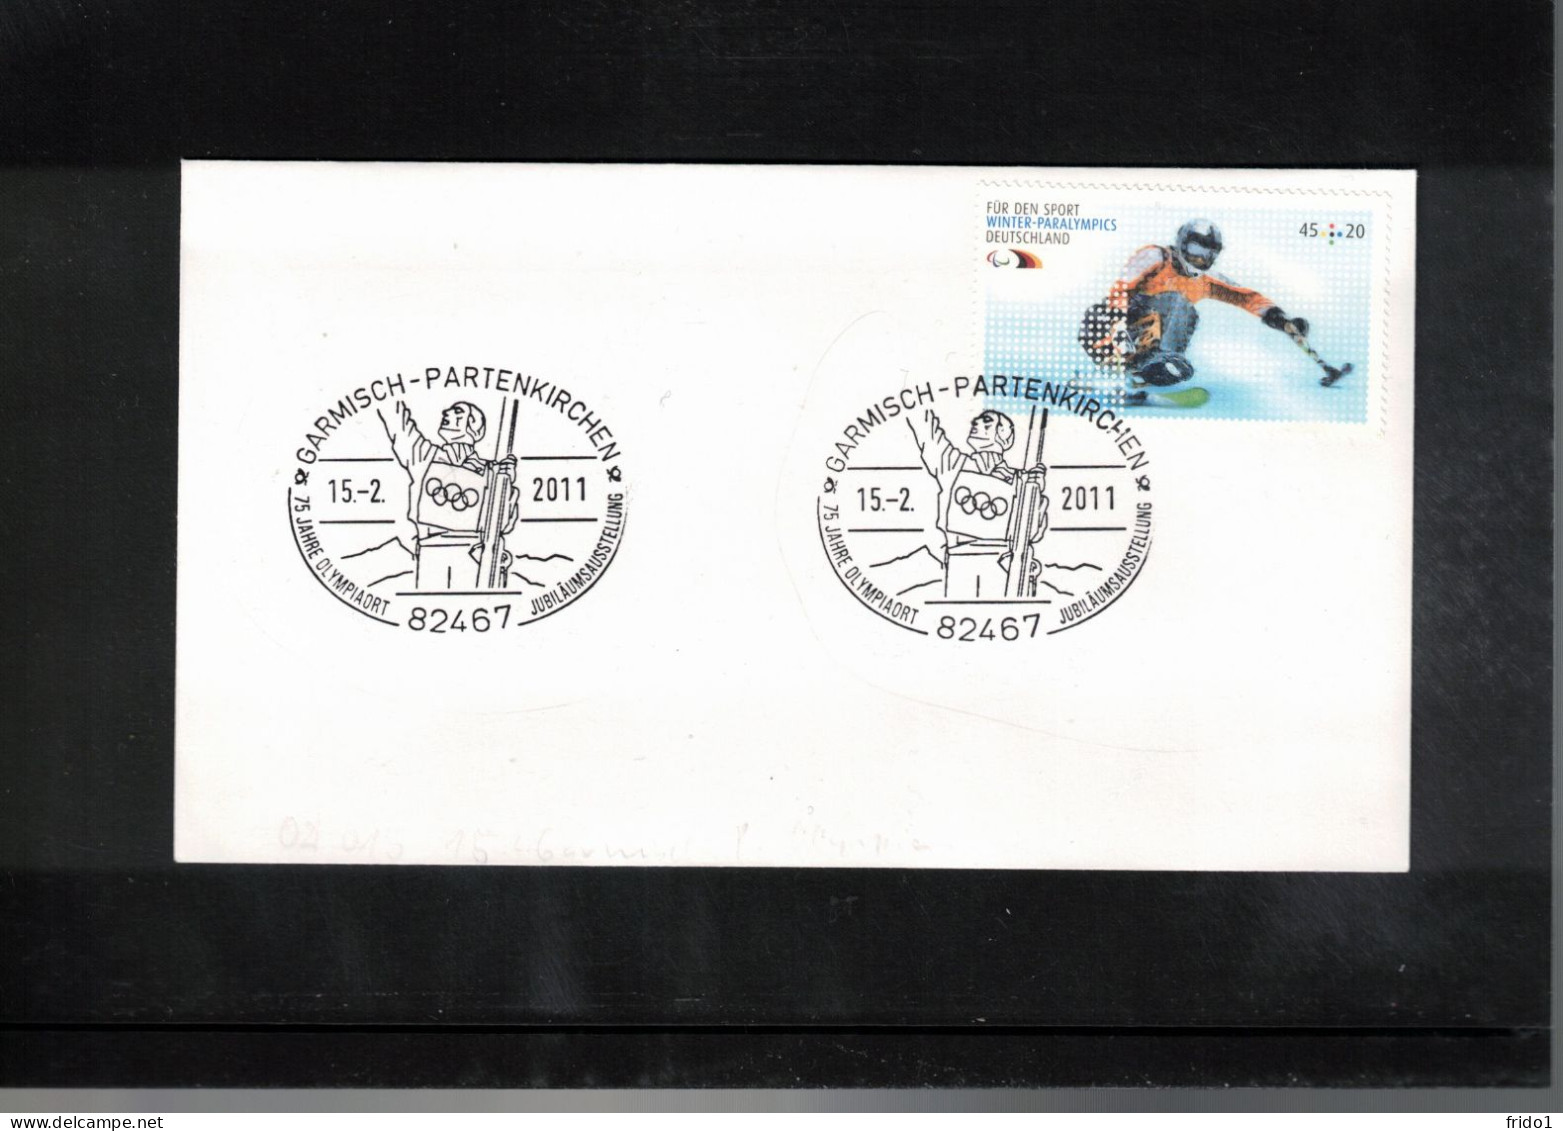 Germany 2011 75th Anniversary Of The Olympic Games In Garmisch-Partenkirchen Interesting Cover - Invierno 1936: Garmisch-Partenkirchen